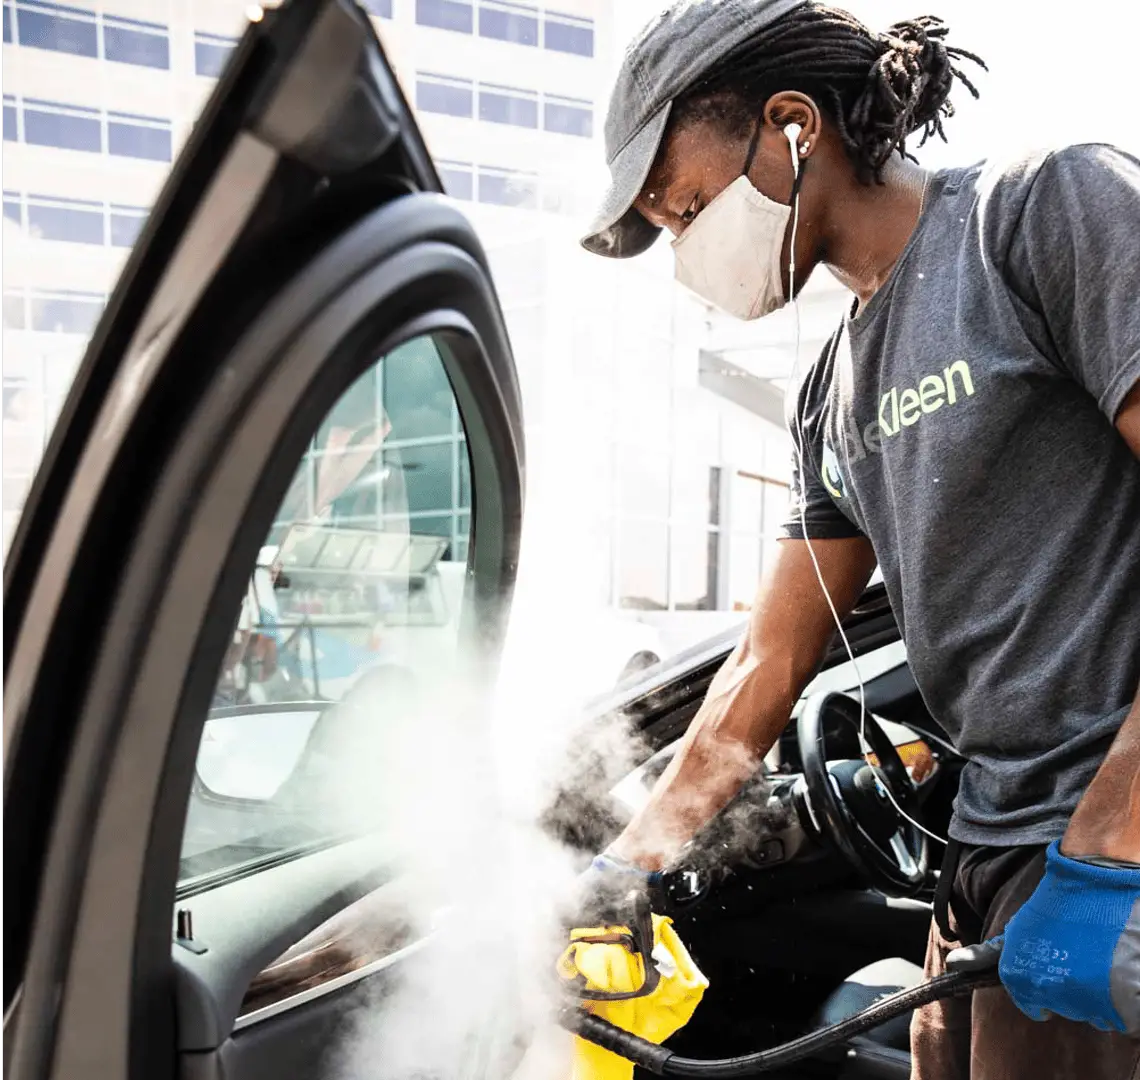 How vehicle sanitization &  disinfection can drive revenue